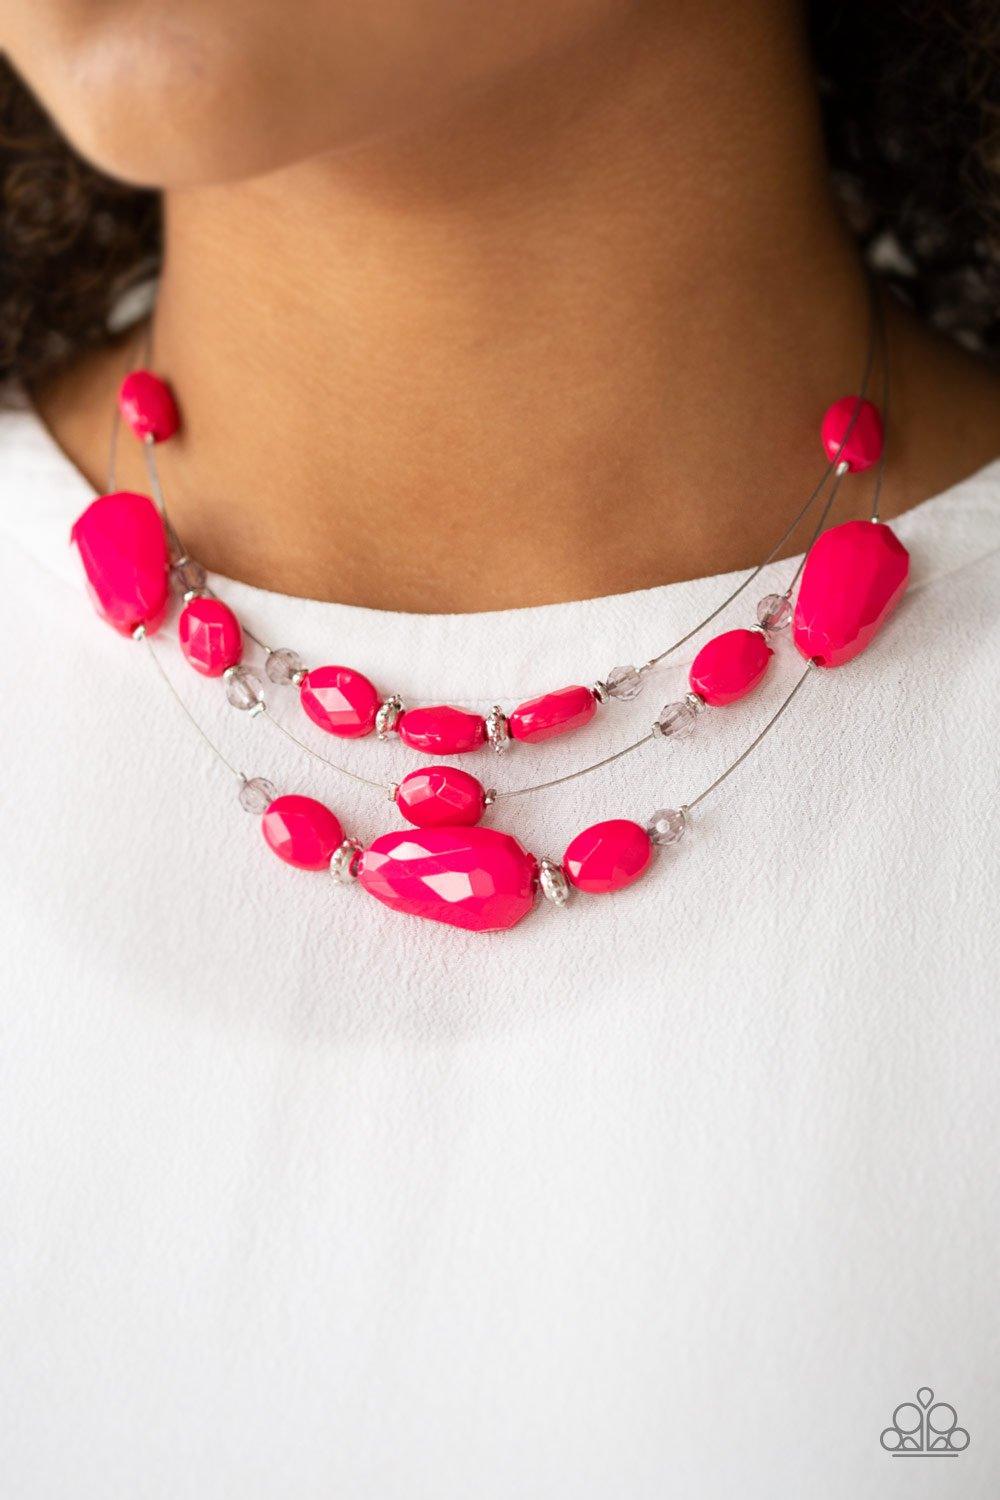 Radiant Reflections Pink Necklace - Jewelry by Bretta